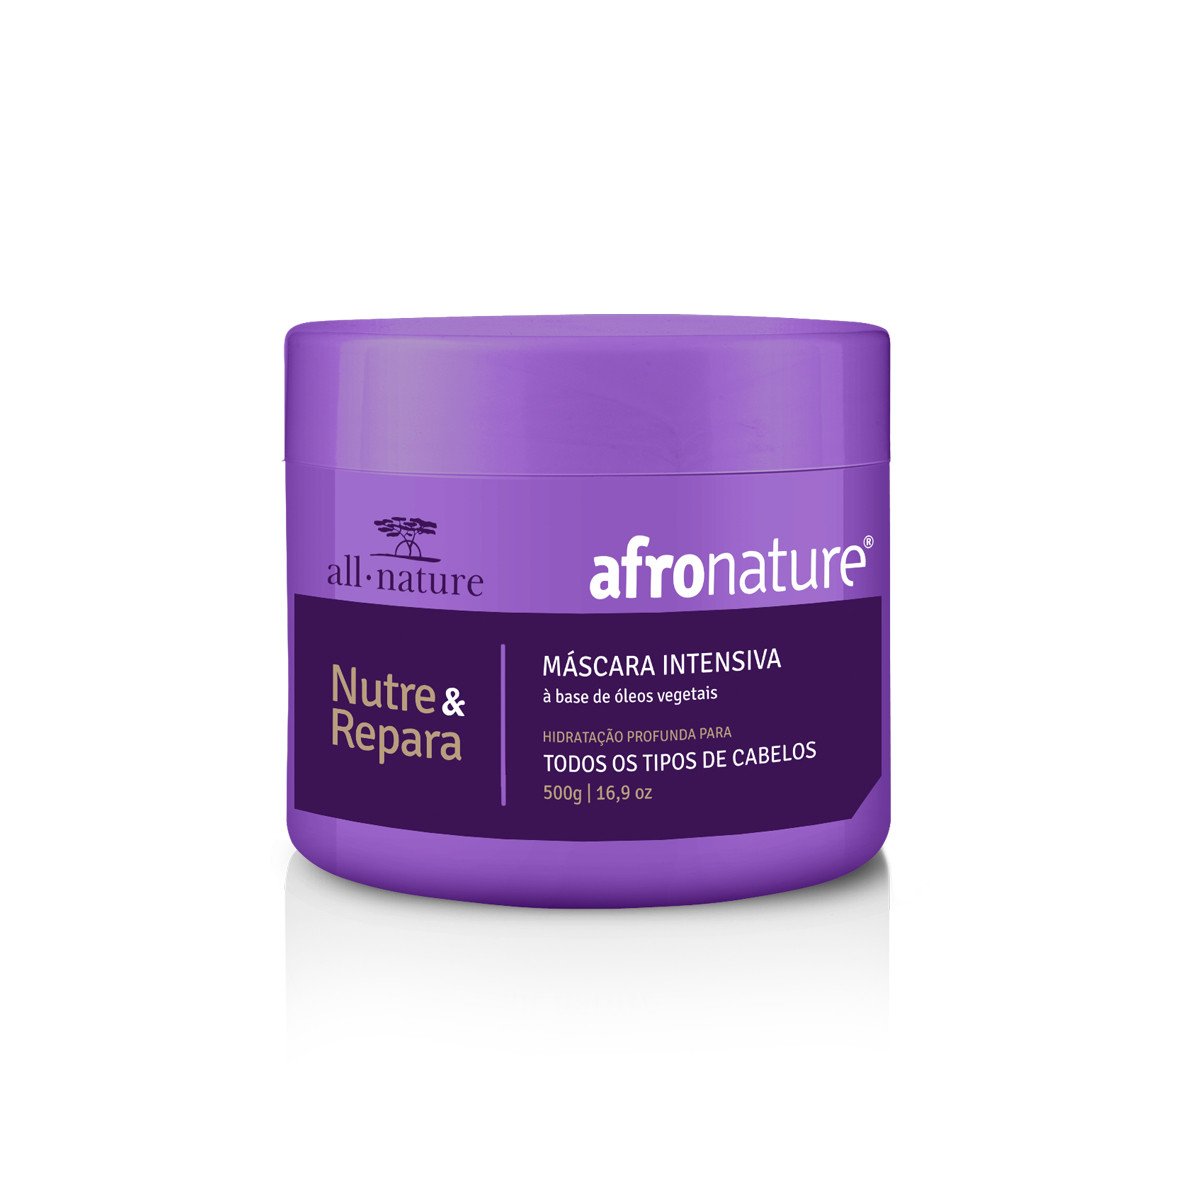 All Nature Hair Mask Hydration Moisturizing Nourishing Repair Afro Intensive Mask 500g - All Nature